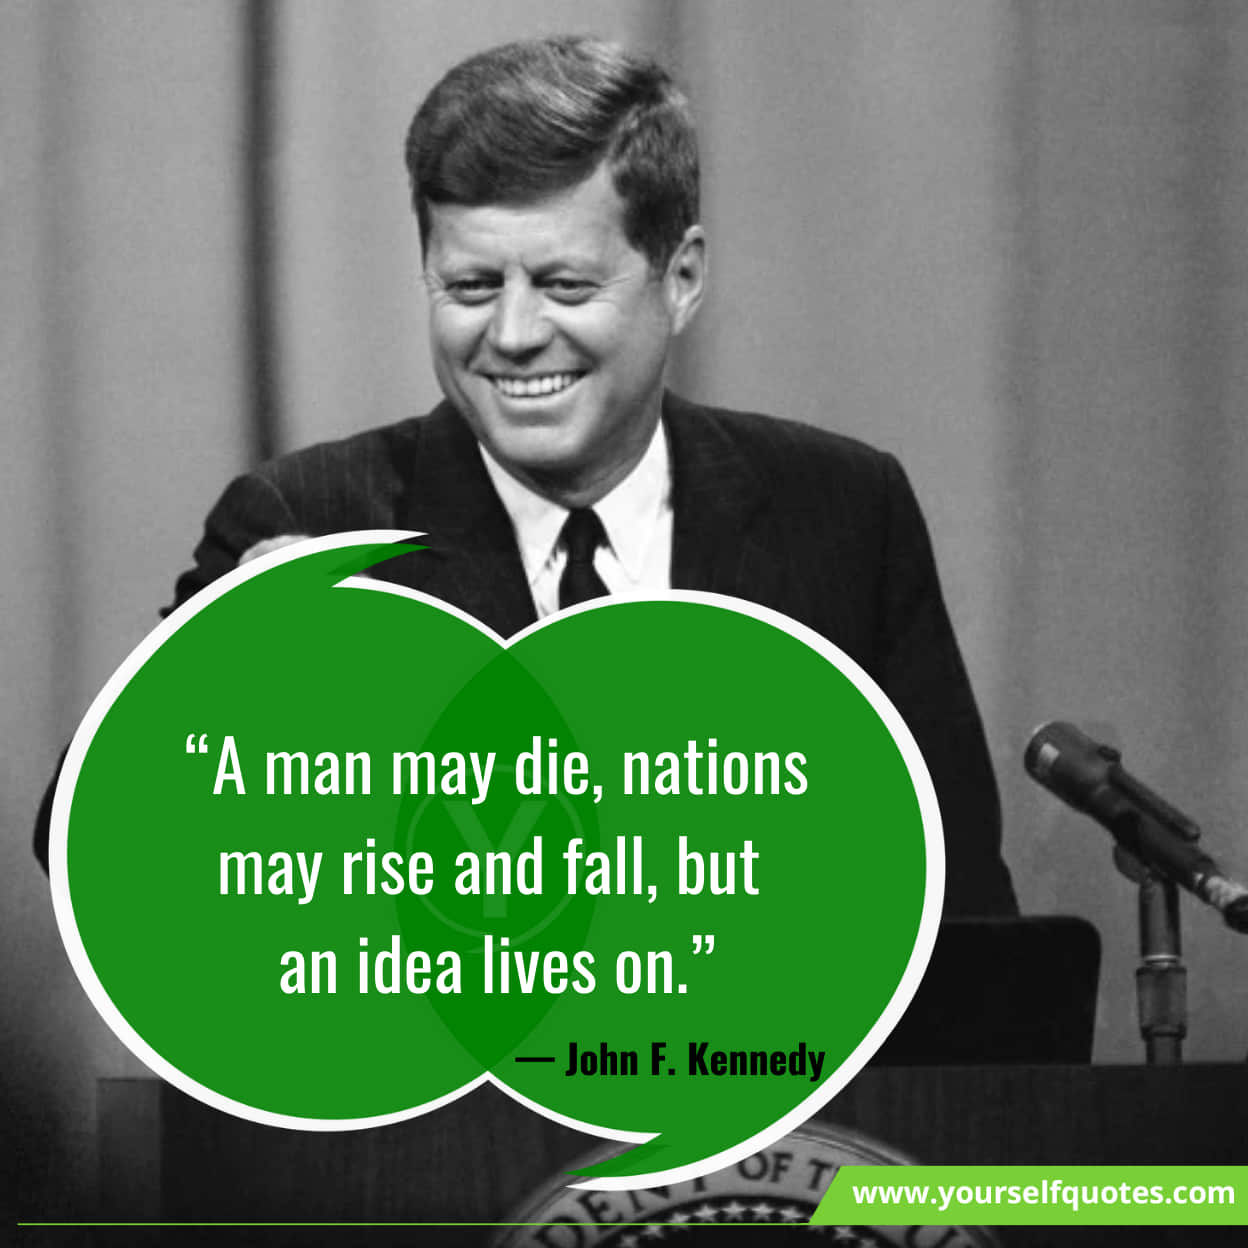 John F Kennedy Inspirational Quotes